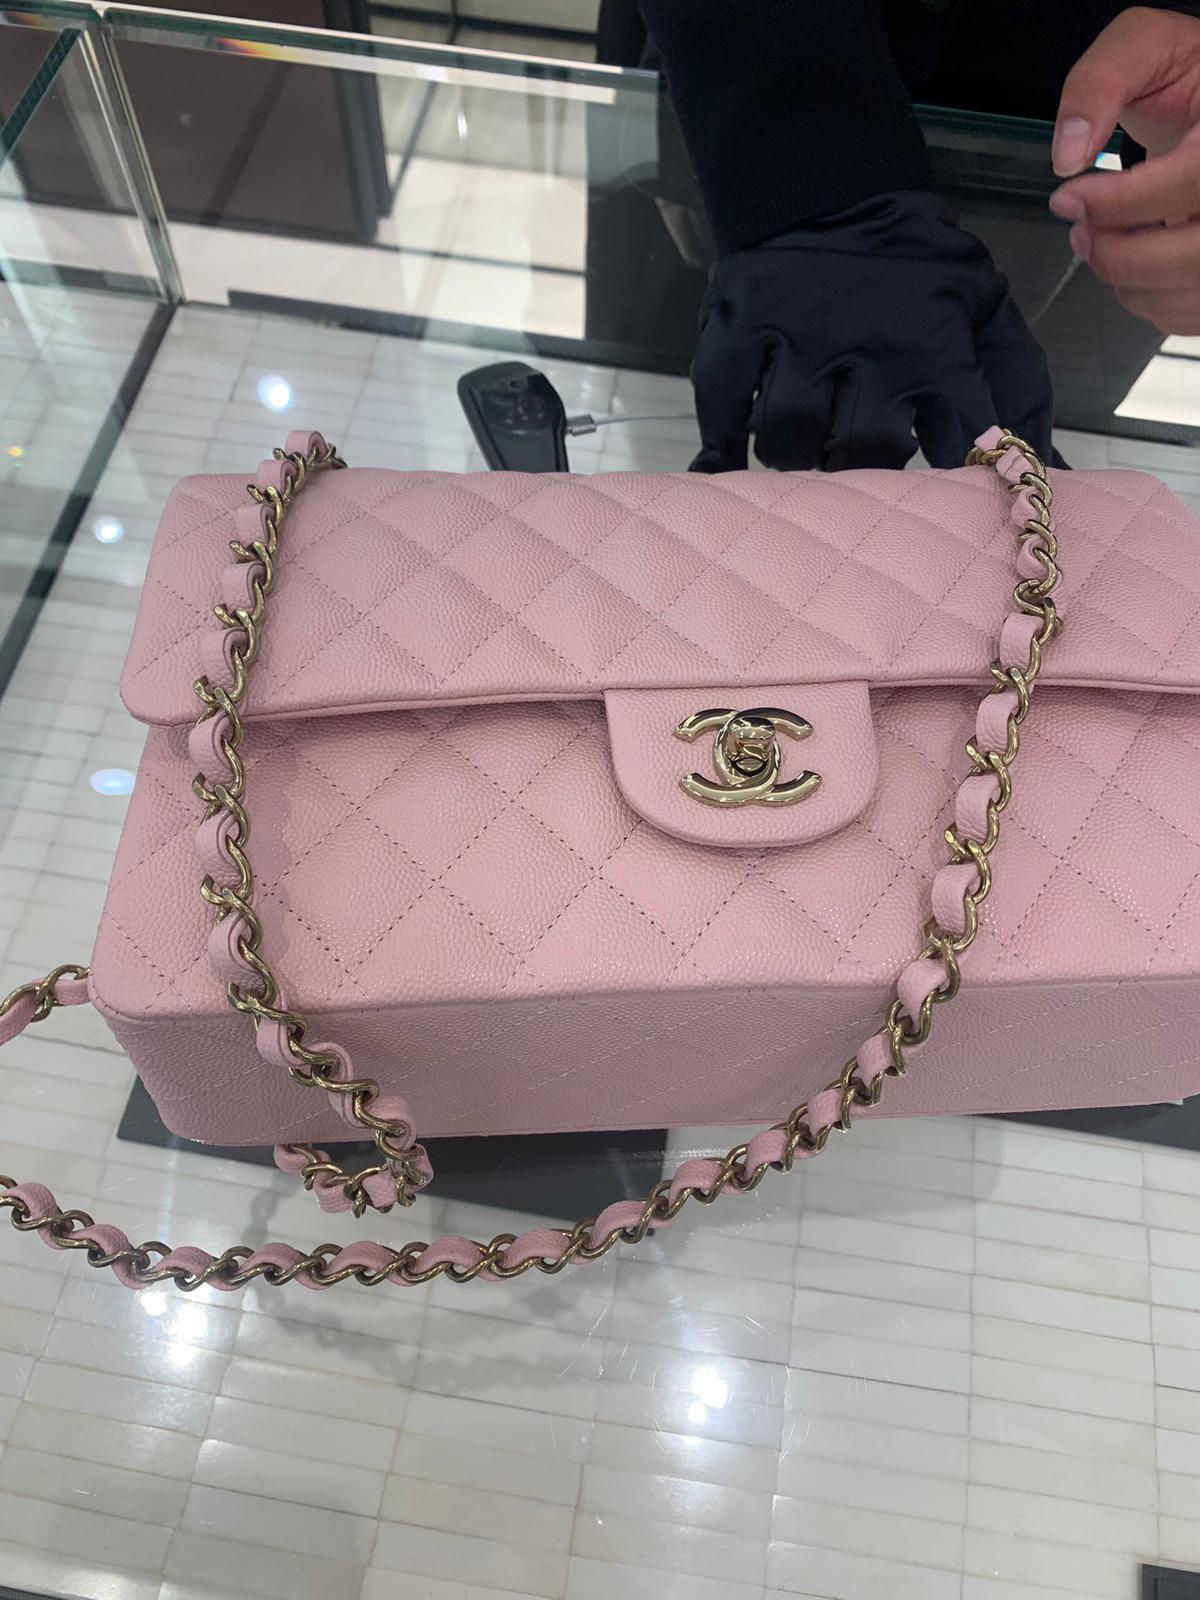 Where is a Chanel Flap Less Expensive? - PurseBop